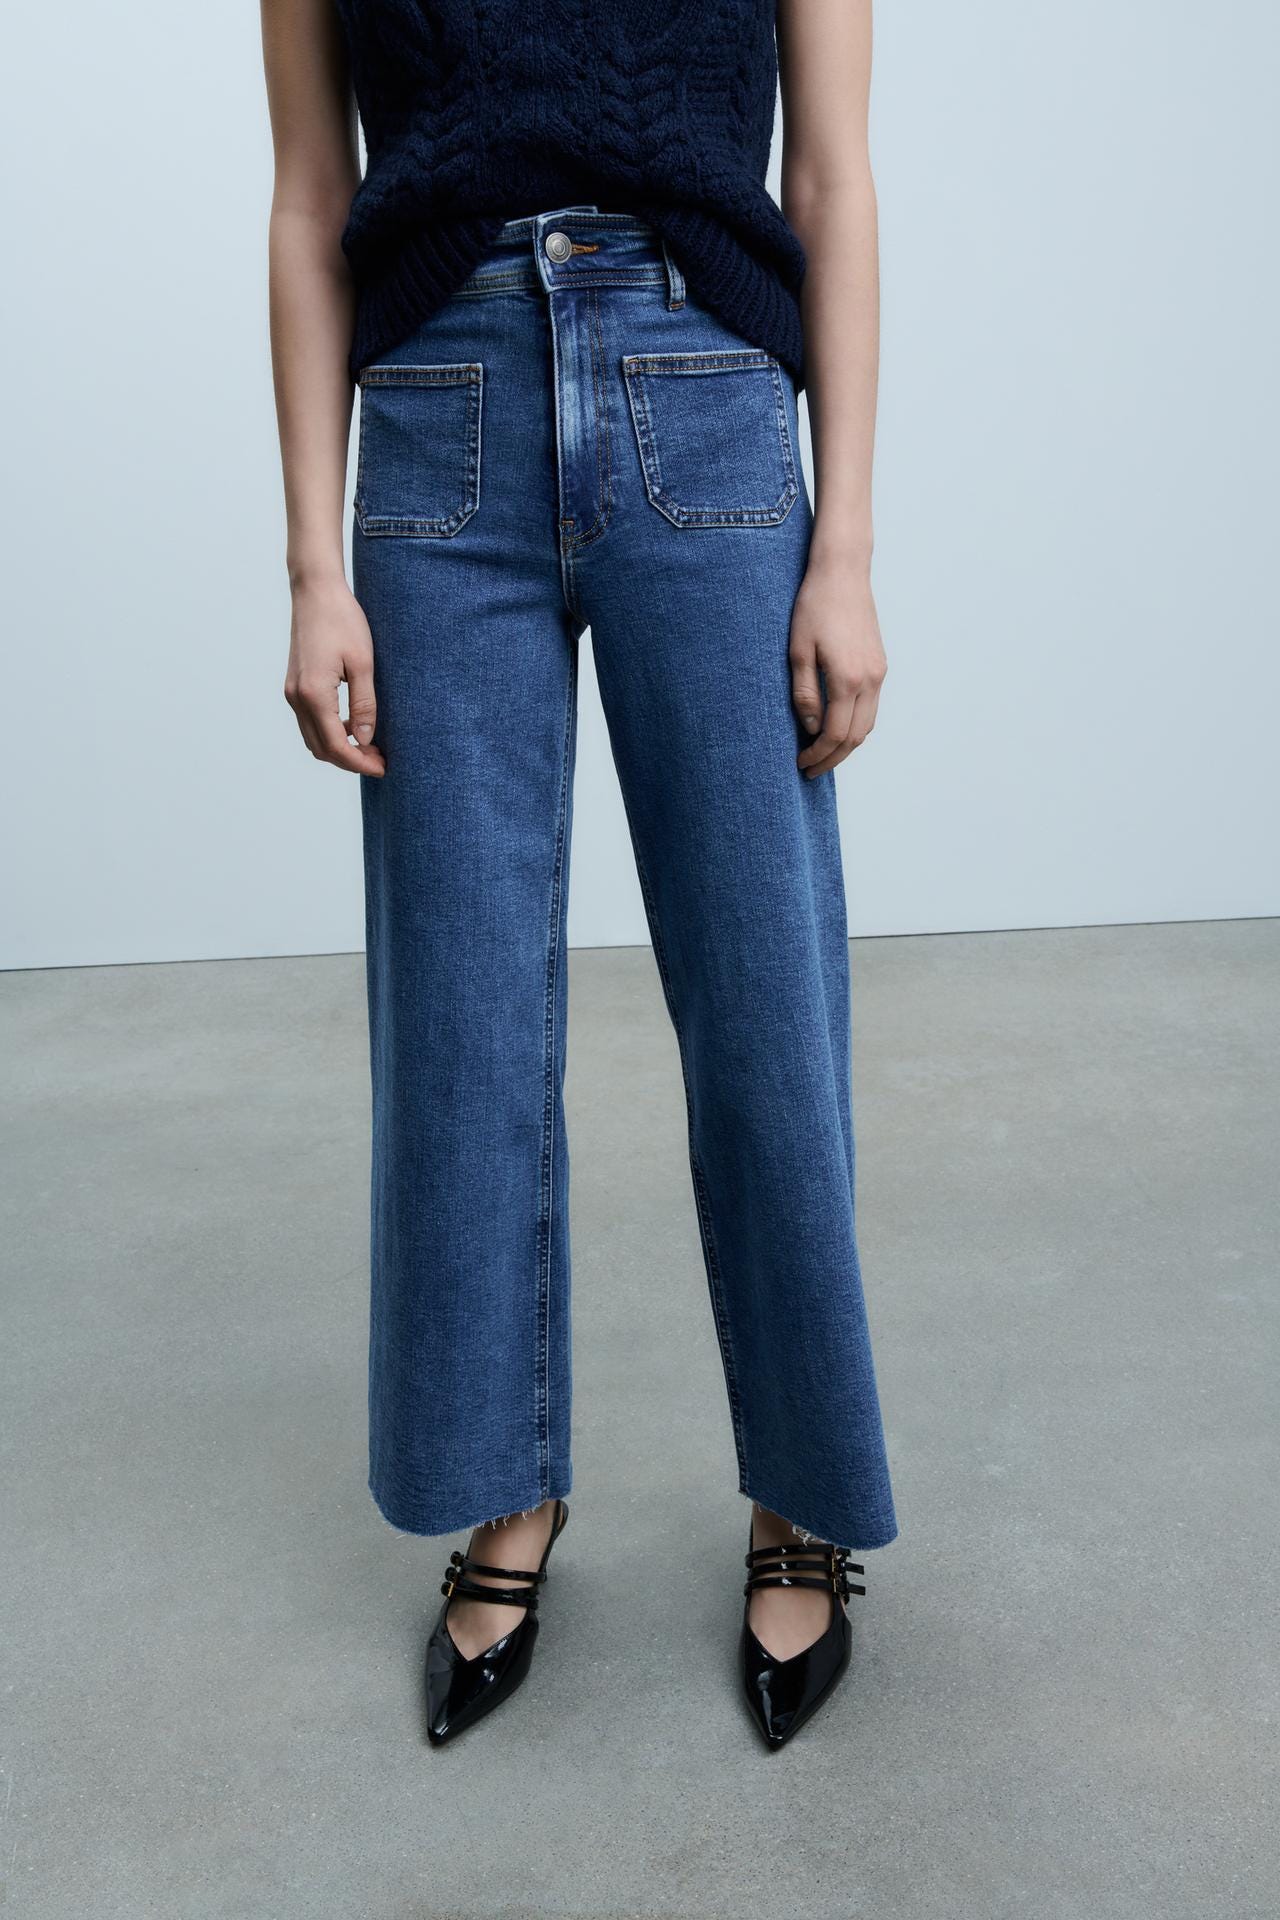 ZW COLLECTION MARINE STRAIGHT-LEG HIGH-WAIST JEANS WITH POCKETS - Blue by Zara - Image 1